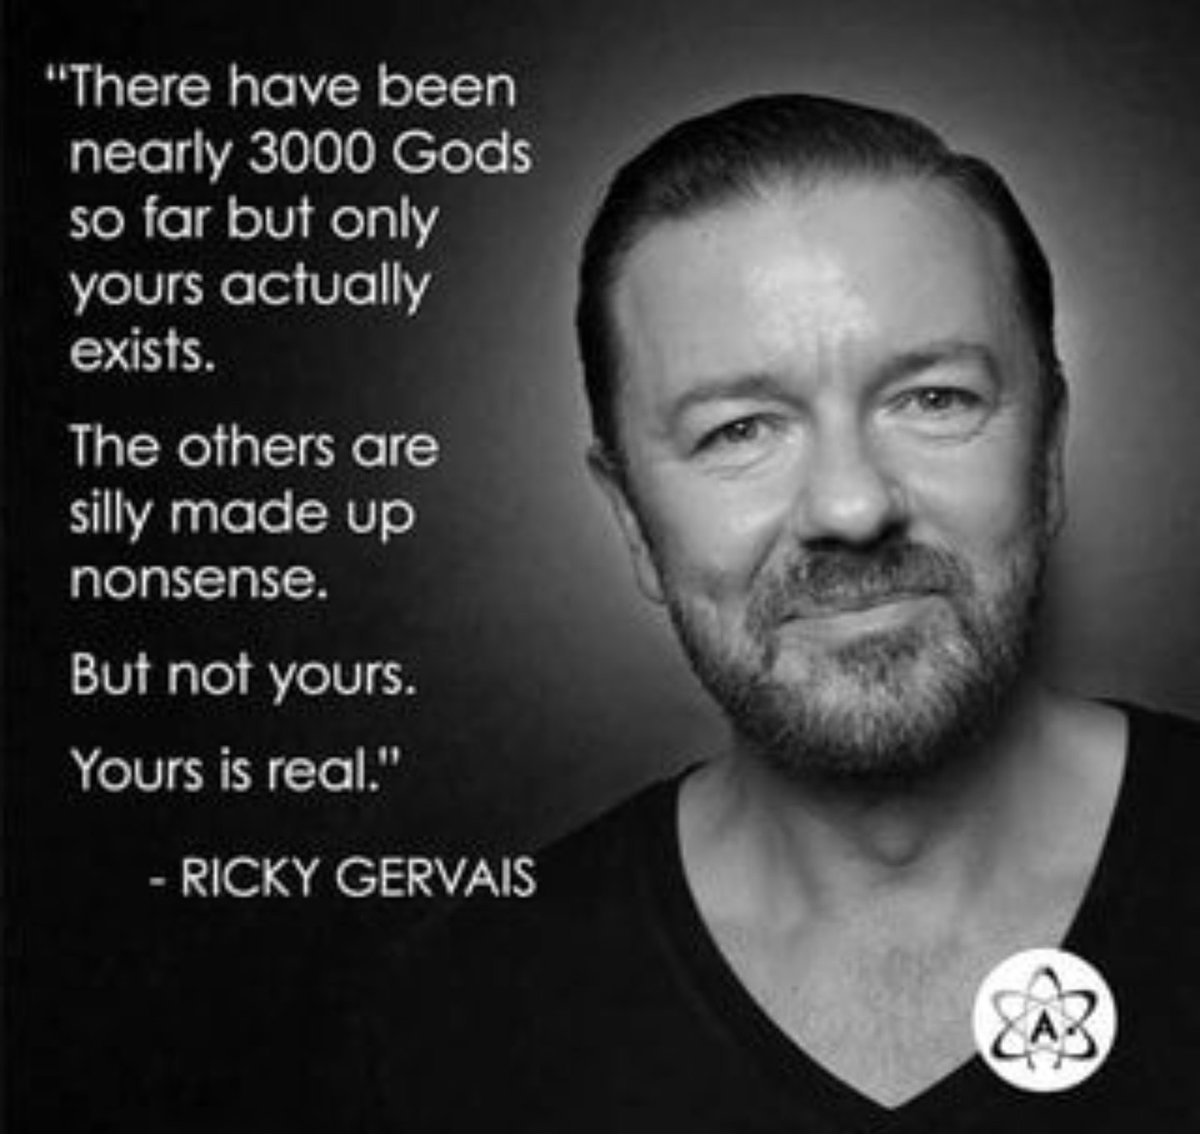 And now, #SundayThoughts from Ricky Gervais. The logic is definitely food for thought.

Perhaps more like soul food for thought.

#SundayVibes? https://t.co/55lcFs9gzk